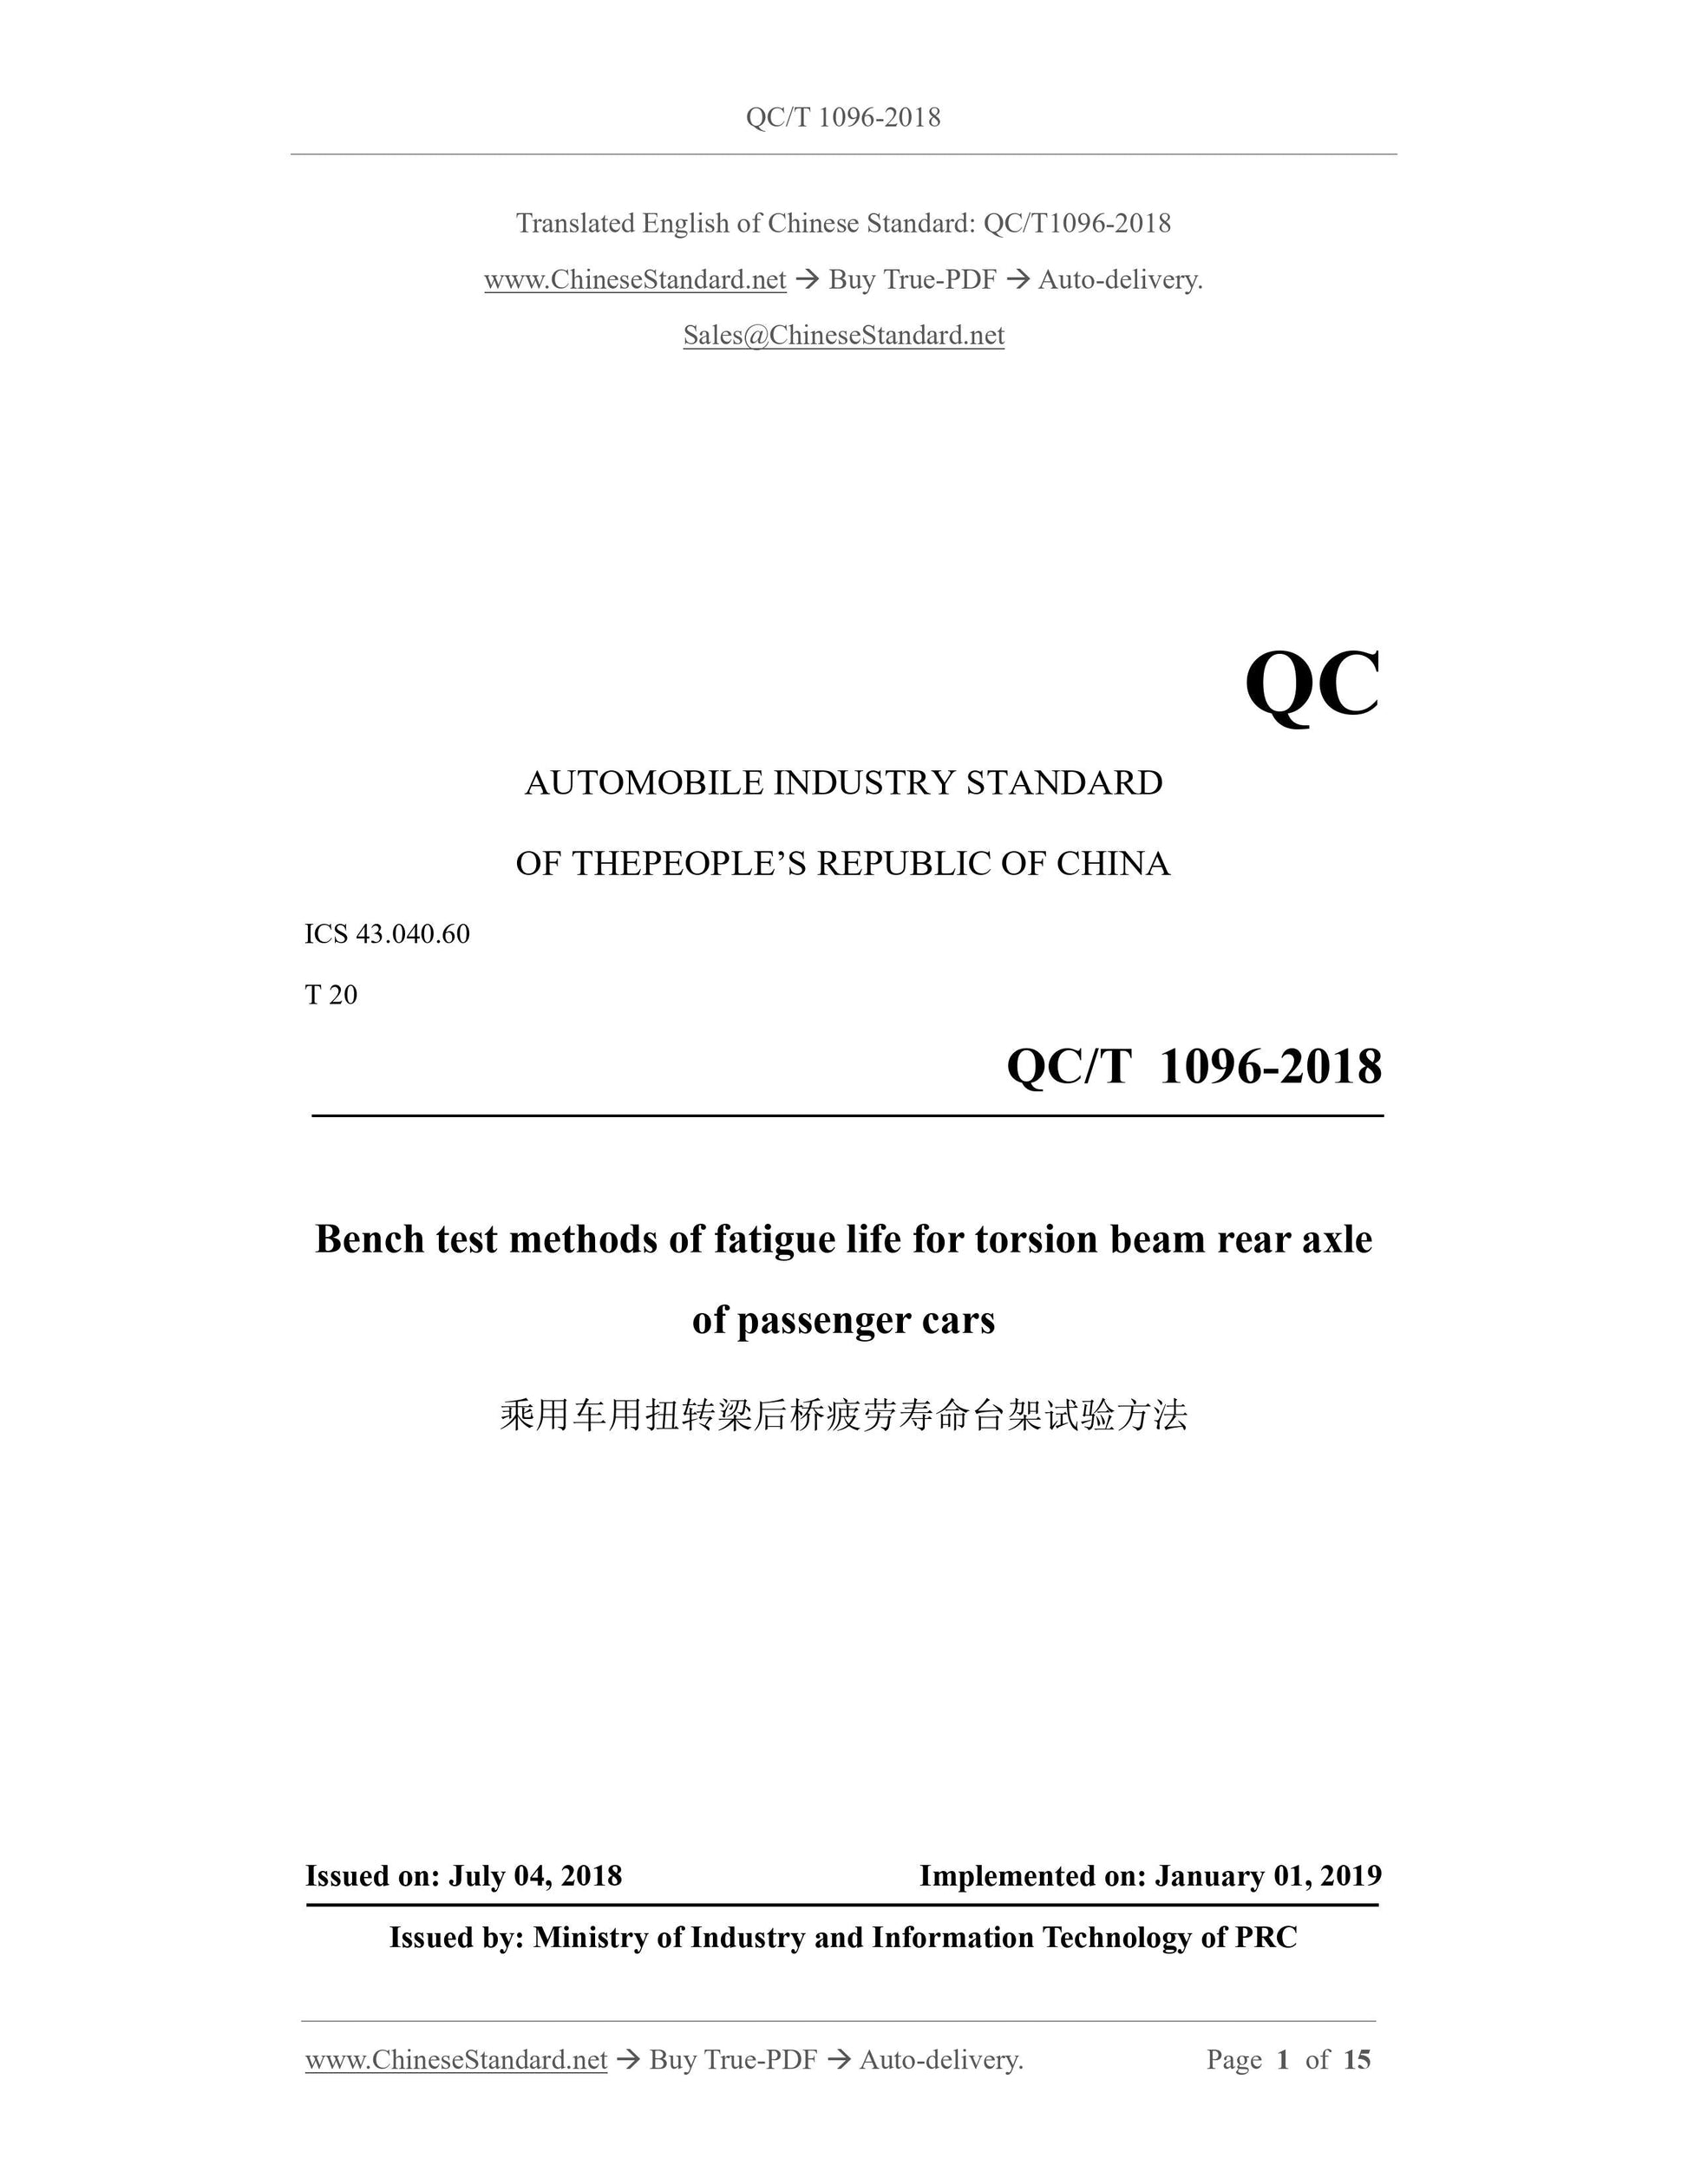 QC/T 1096-2018 Page 1